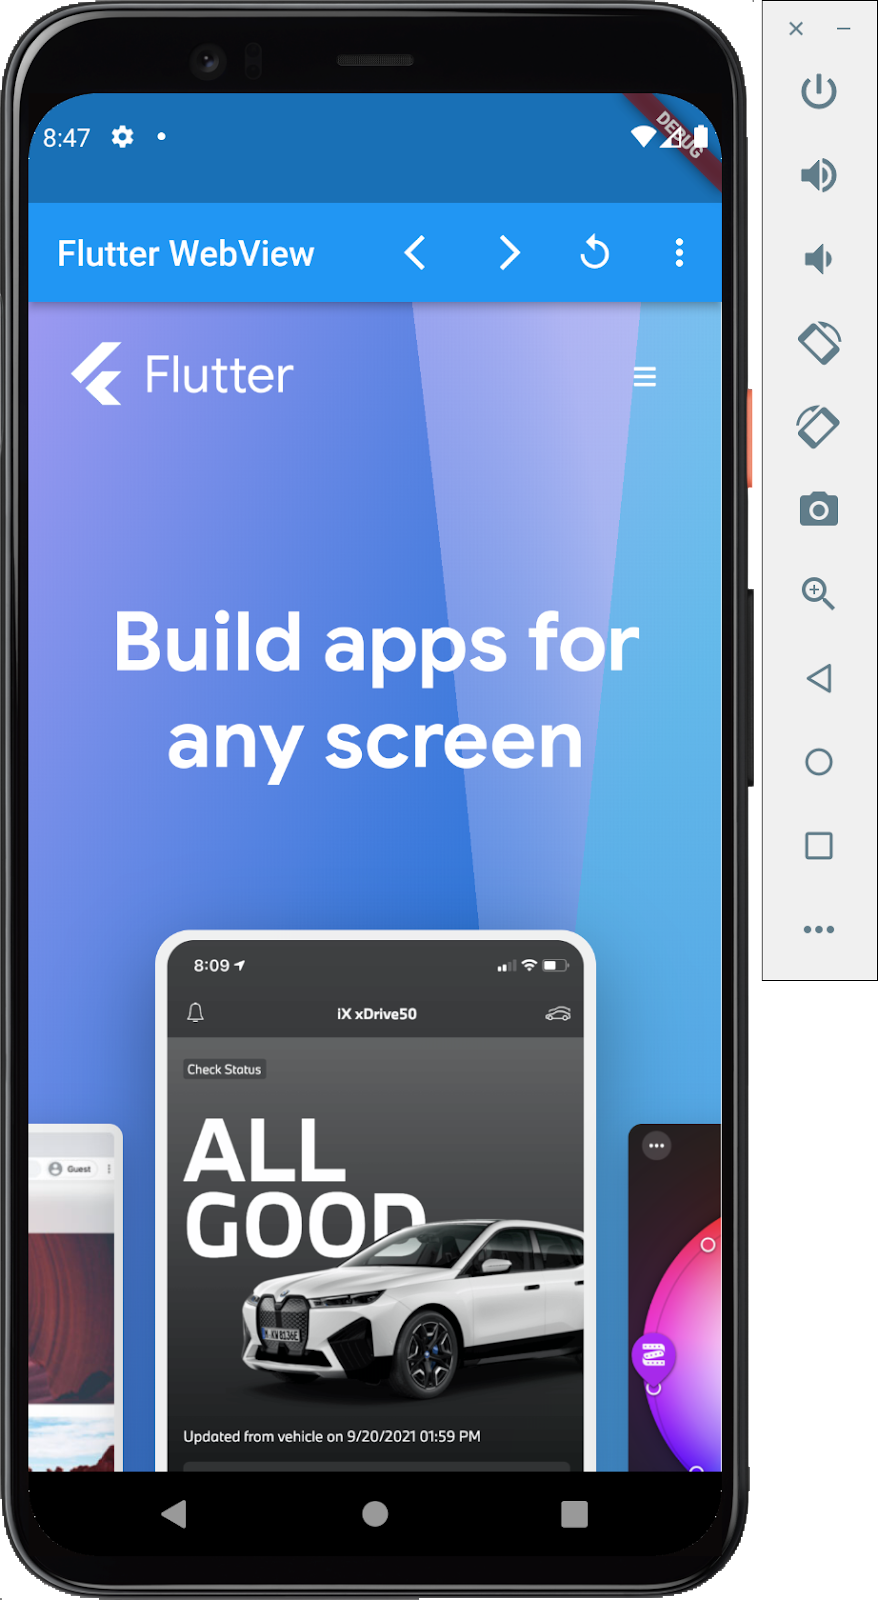 A screen shot of an Android emulator running a Flutter app with an embedded webview showing the Flutter.dev homepage